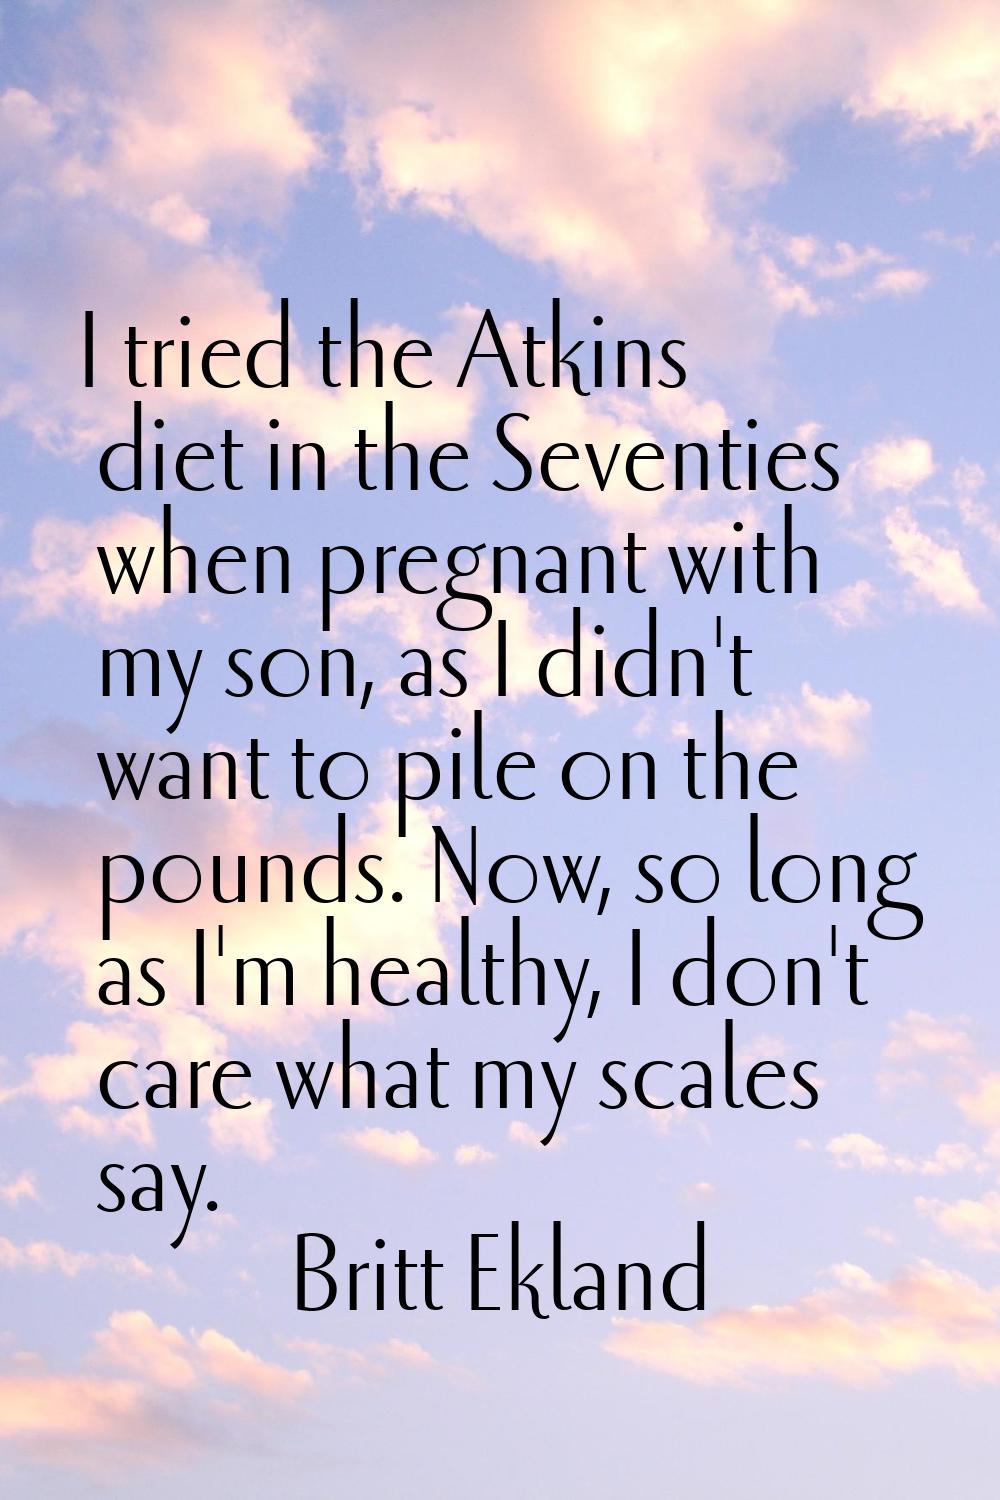 I tried the Atkins diet in the Seventies when pregnant with my son, as I didn't want to pile on the